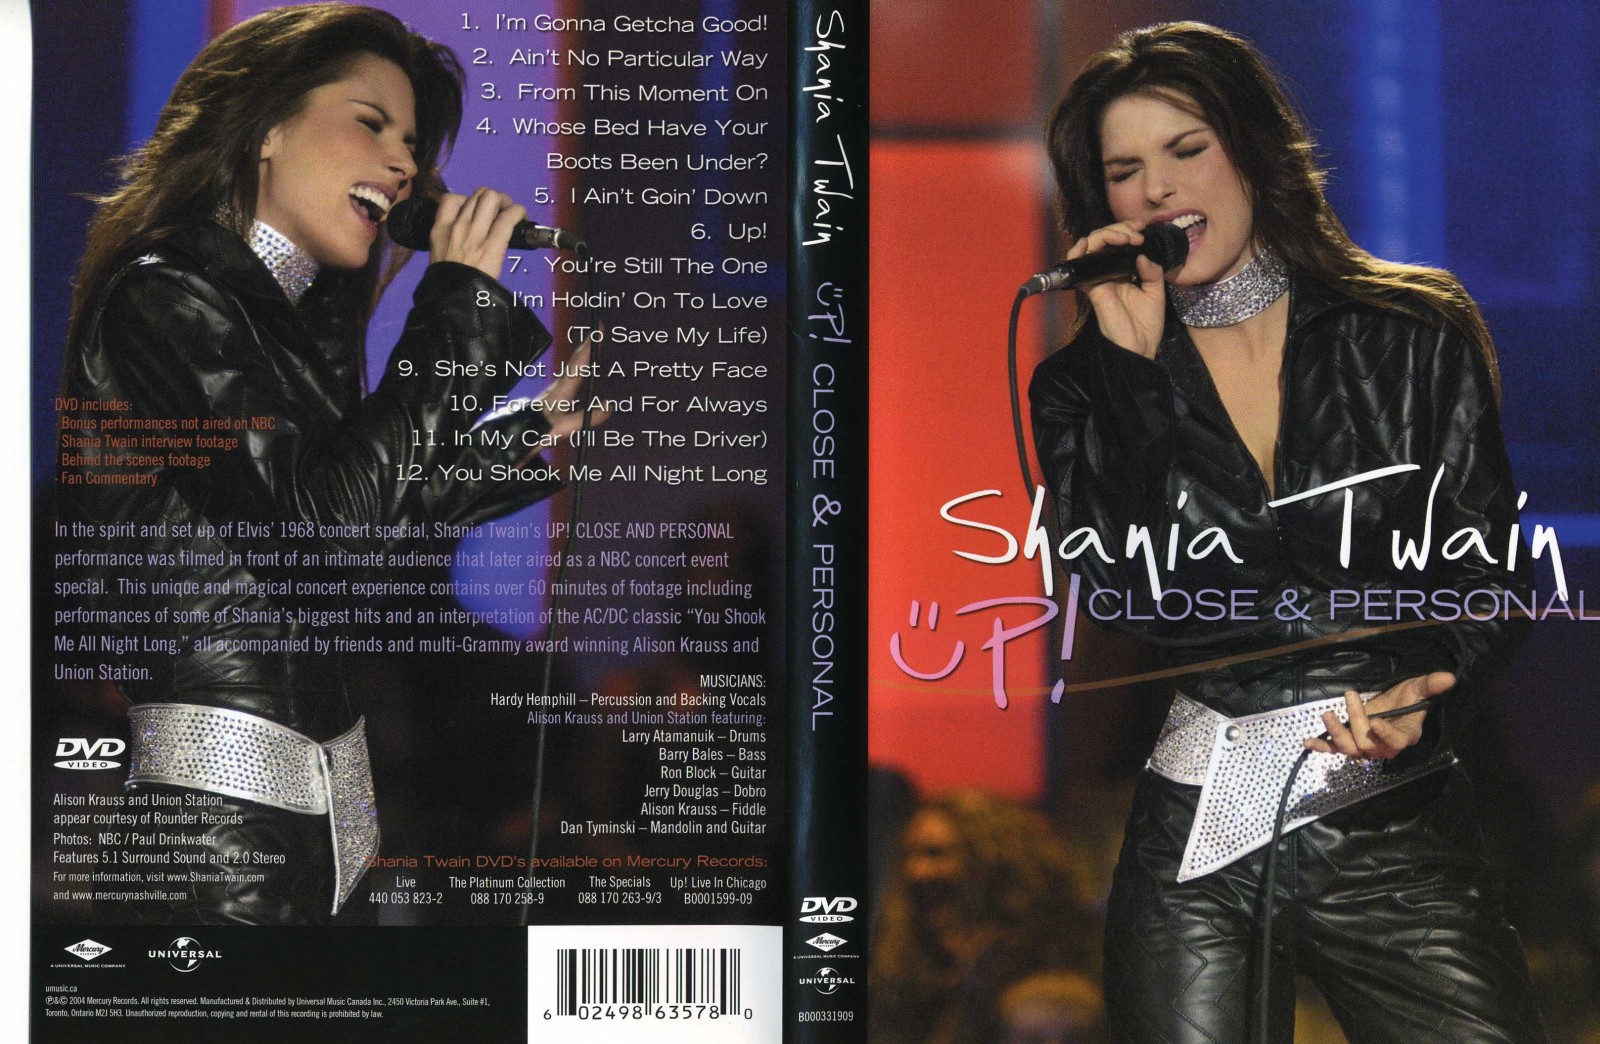 Jaquette DVD Shania Twain - Up close and personal